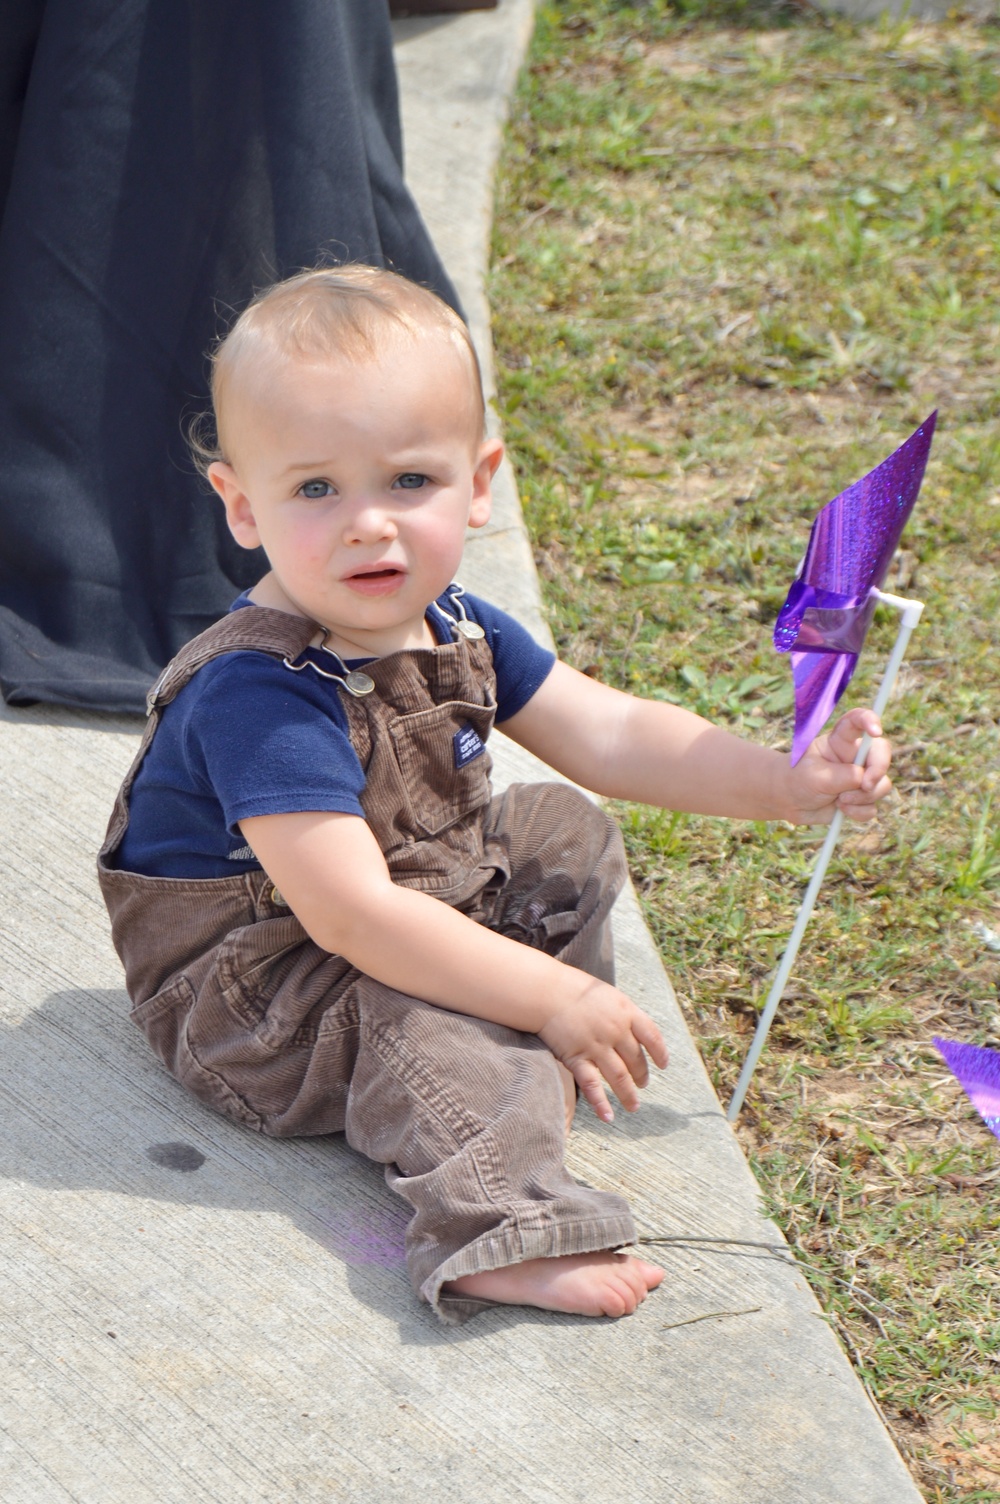 BJACH plants pinwheel garden, committed to ending child abuse